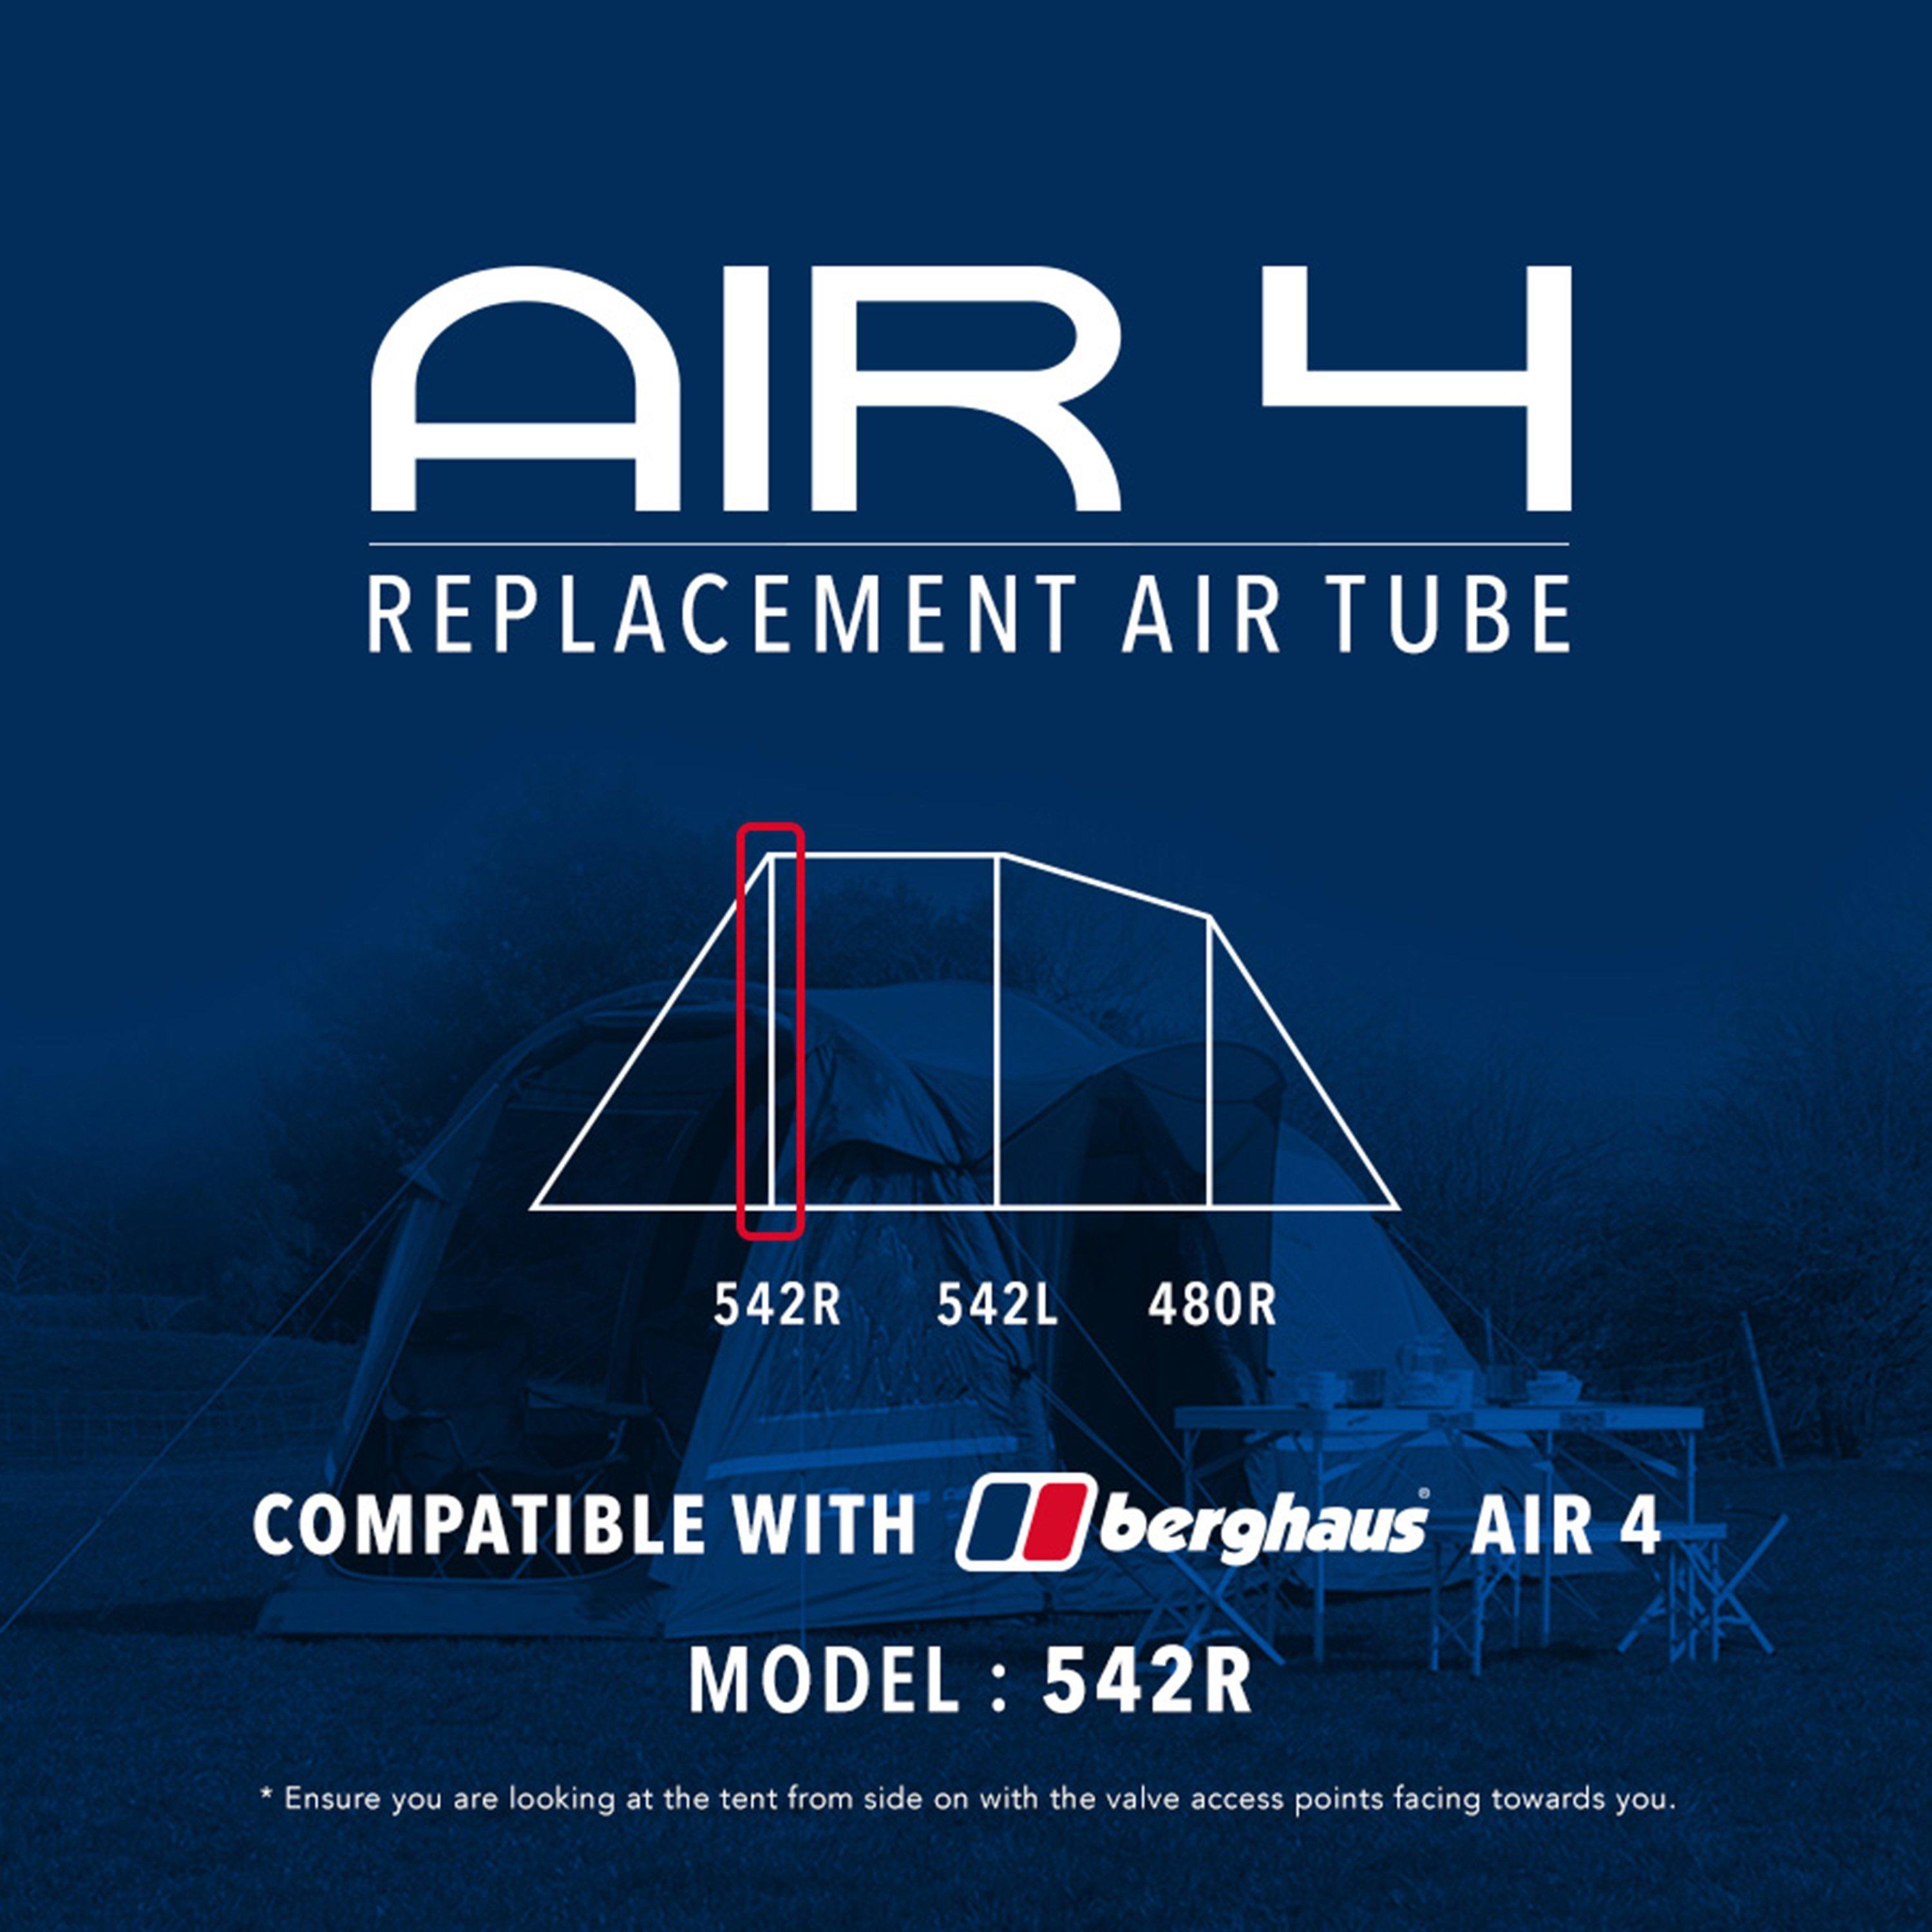  Eurohike Air 4 Replacement Air Tube (Front - 542R), Blue